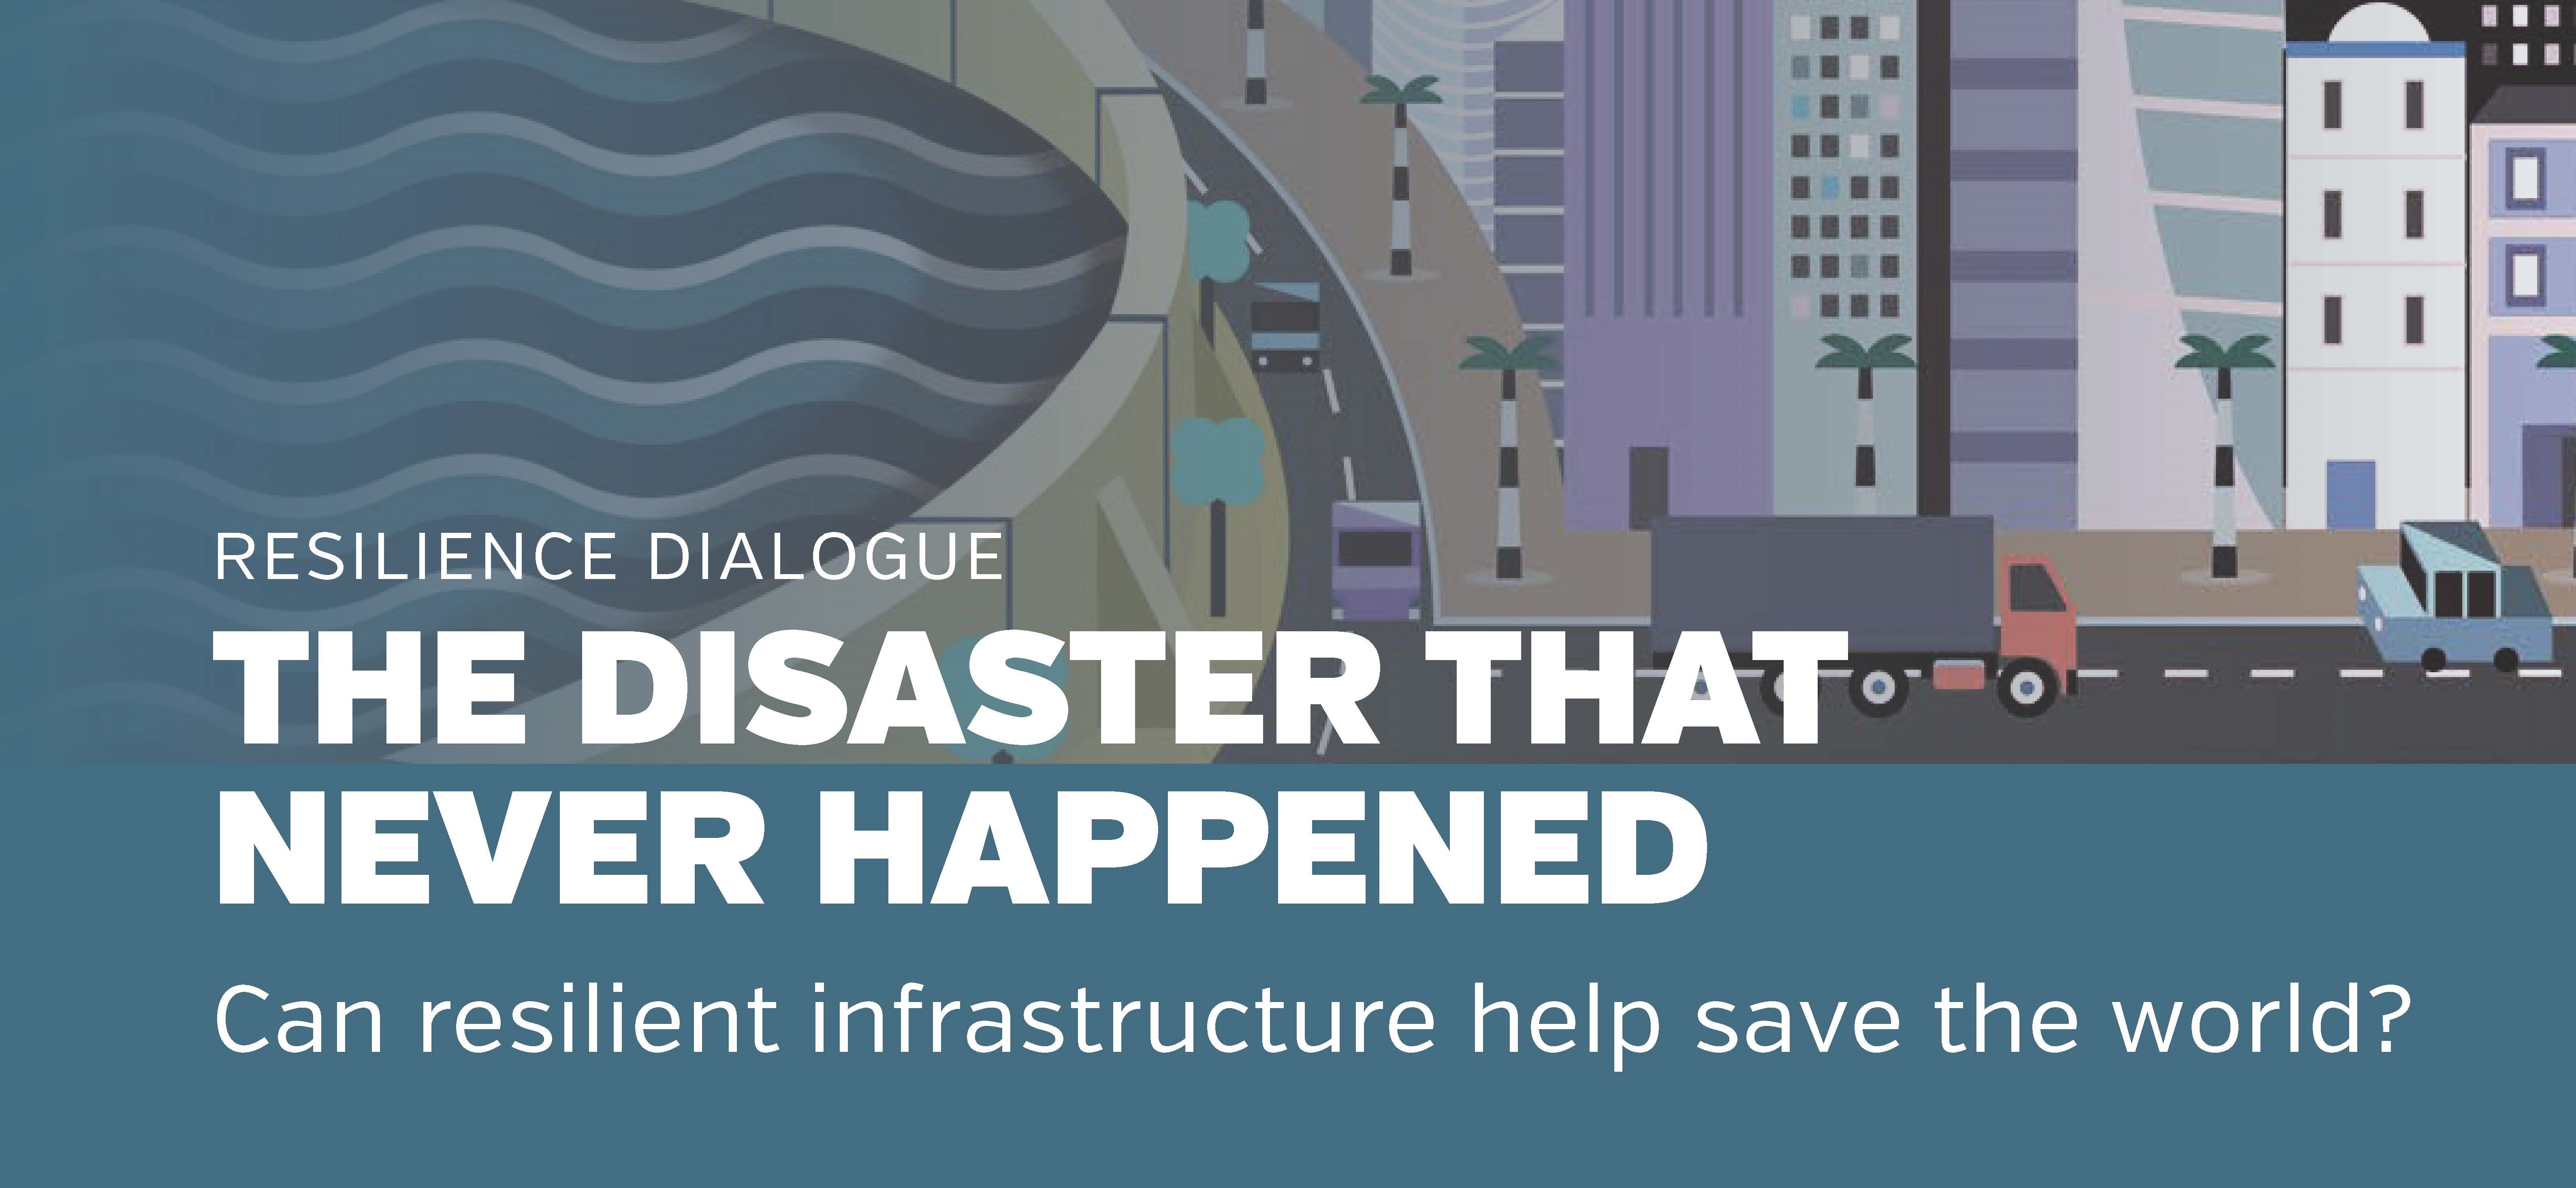 The Disaster That Never Happened: Can Resilient Infrastructure Save the World?